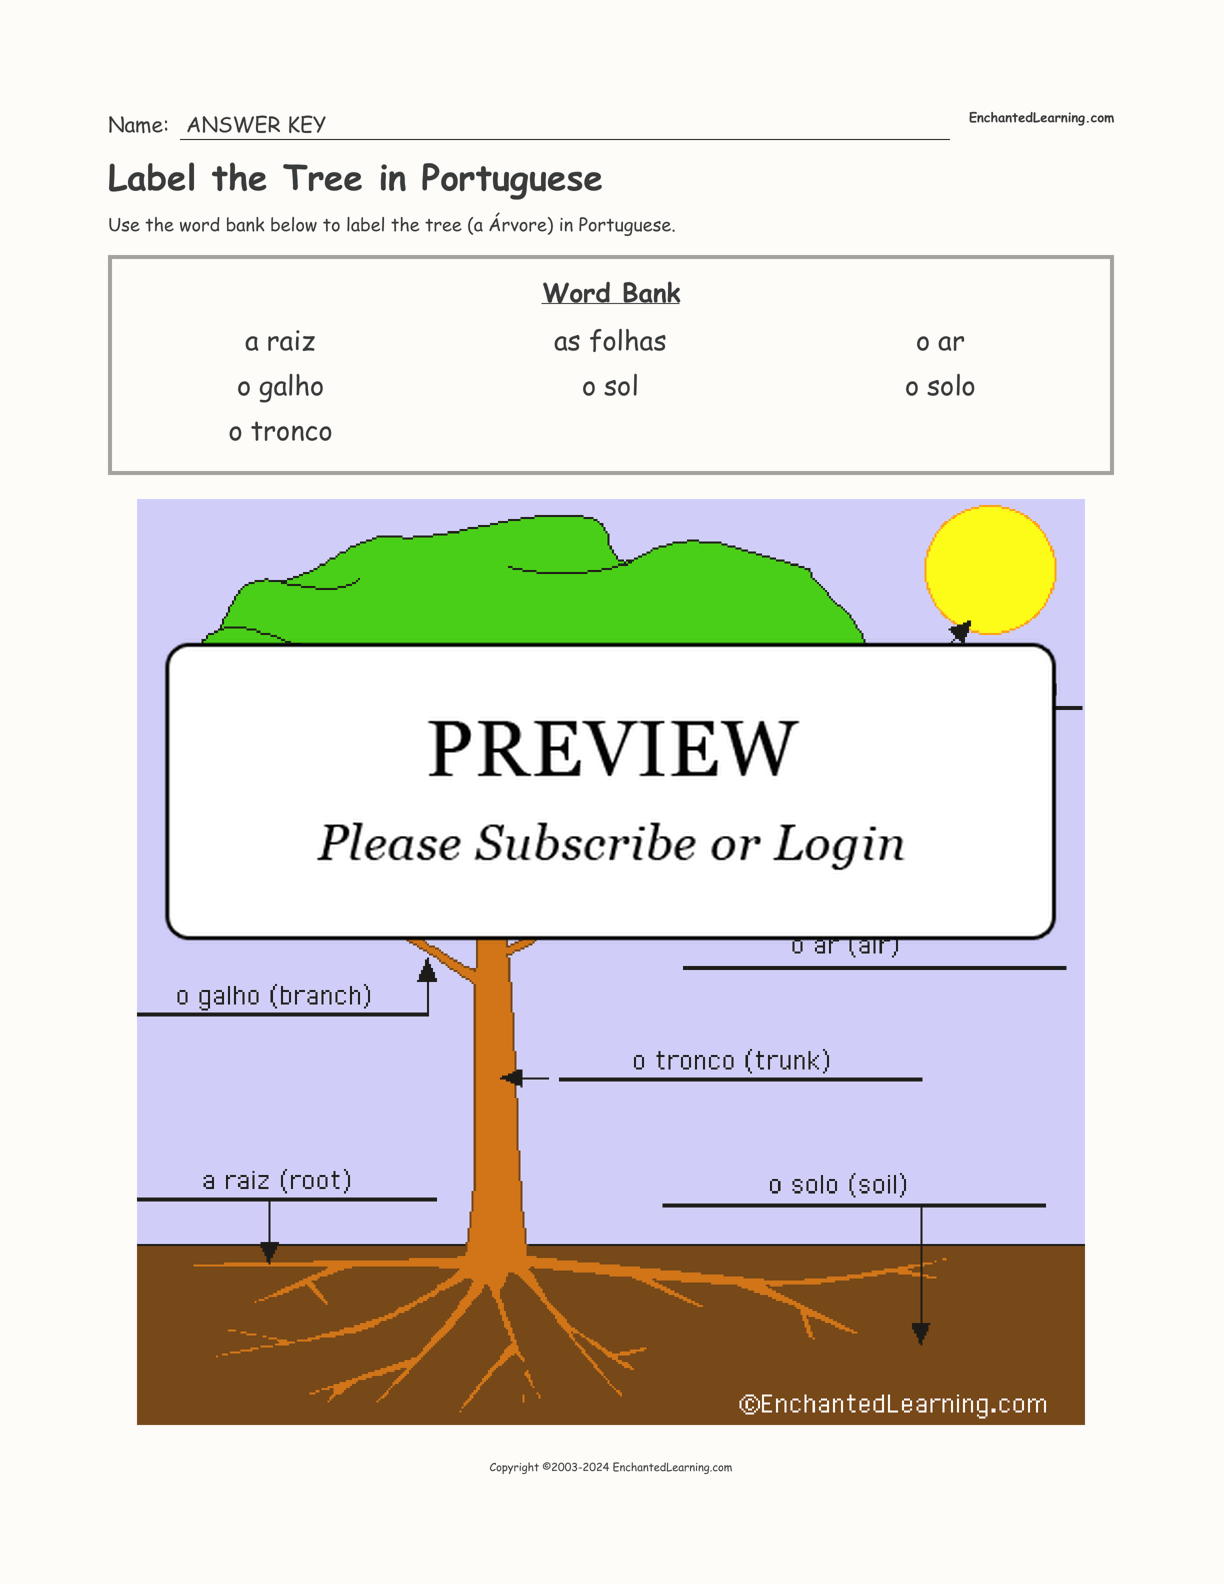 Label the Tree in Portuguese interactive worksheet page 2